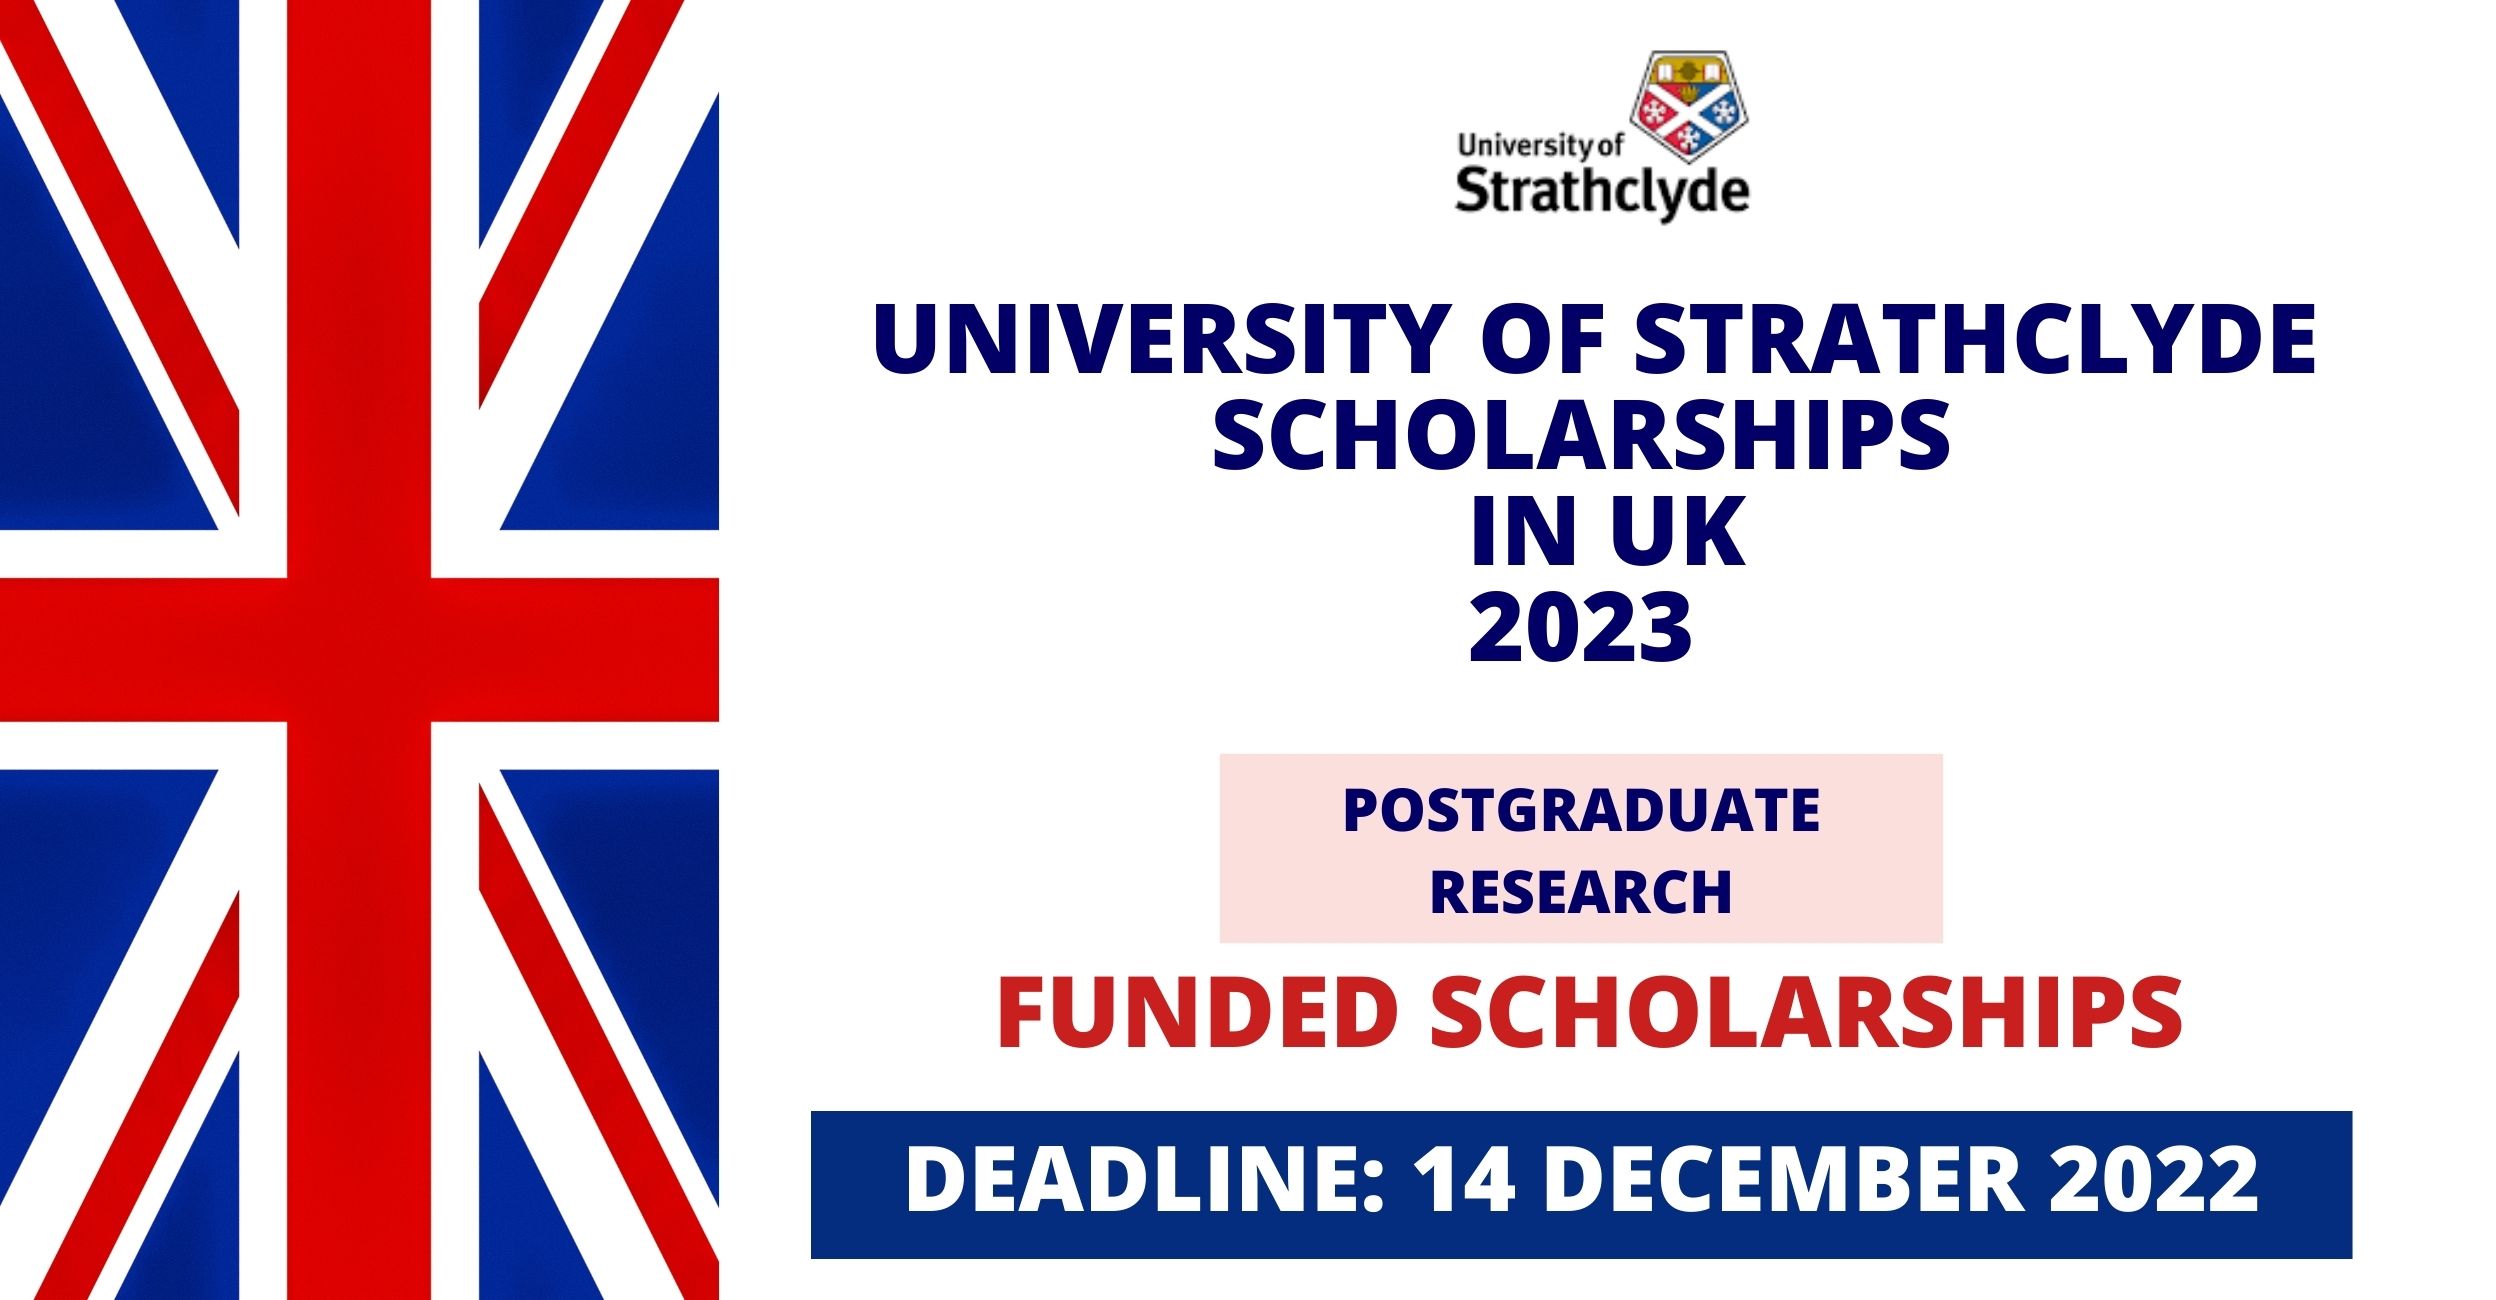 Feature image for Funded Scholarship at University of Strathclyde in UK 2023